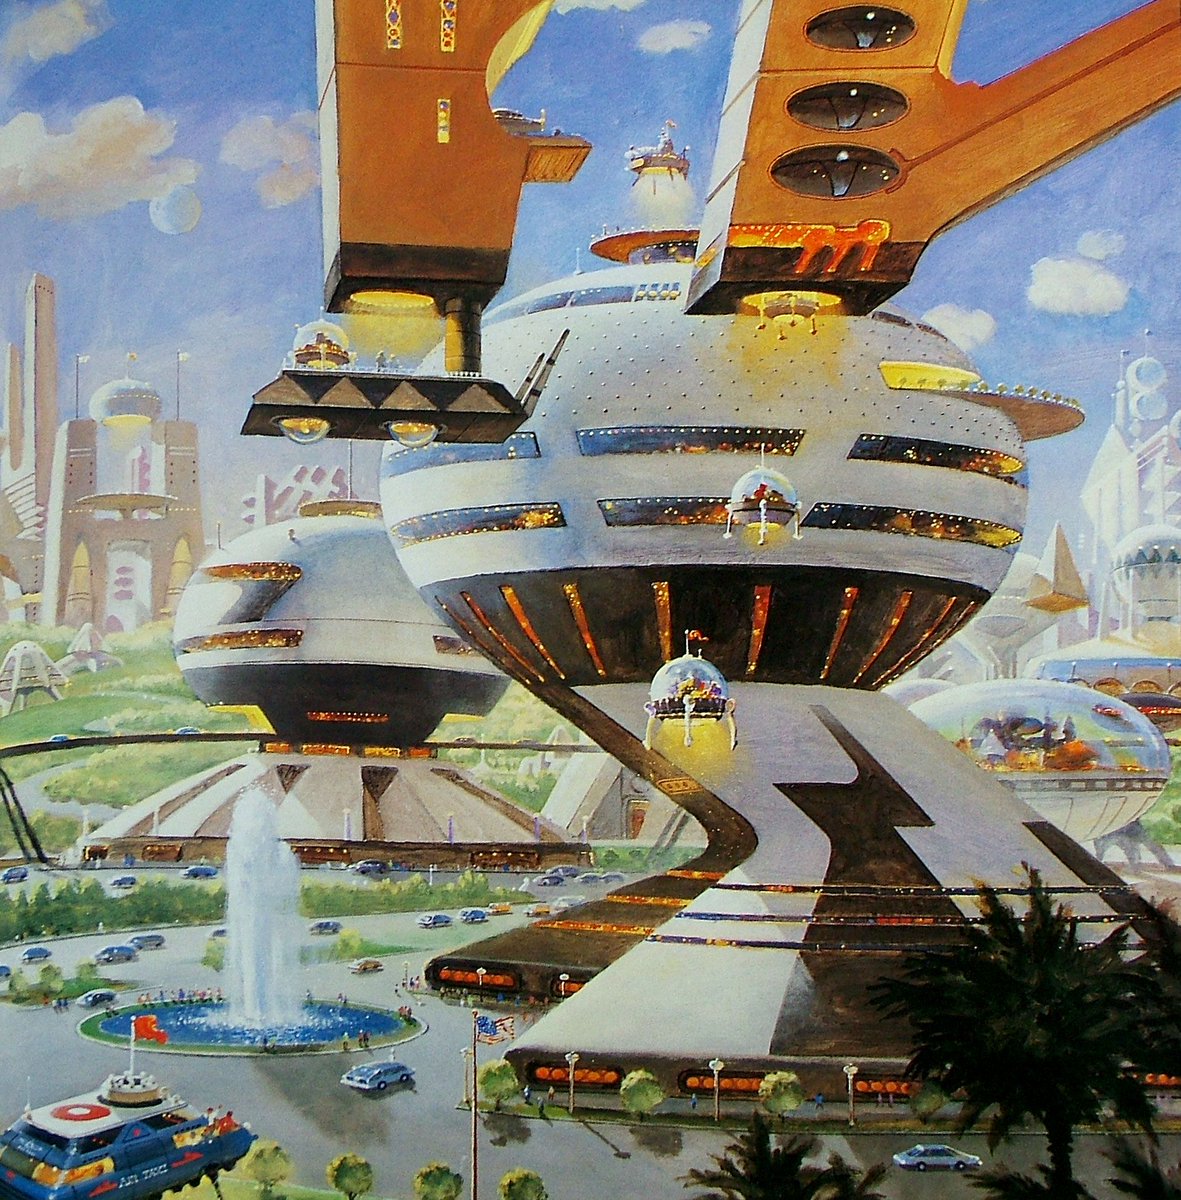 ‘City Center’ by Robert McCall
Date unknown.

#art #futurism #futuristic #future #cityliving #futurecities #Illustration #sciencefiction #scifi #scifiillustration #painting #RobertMcCall